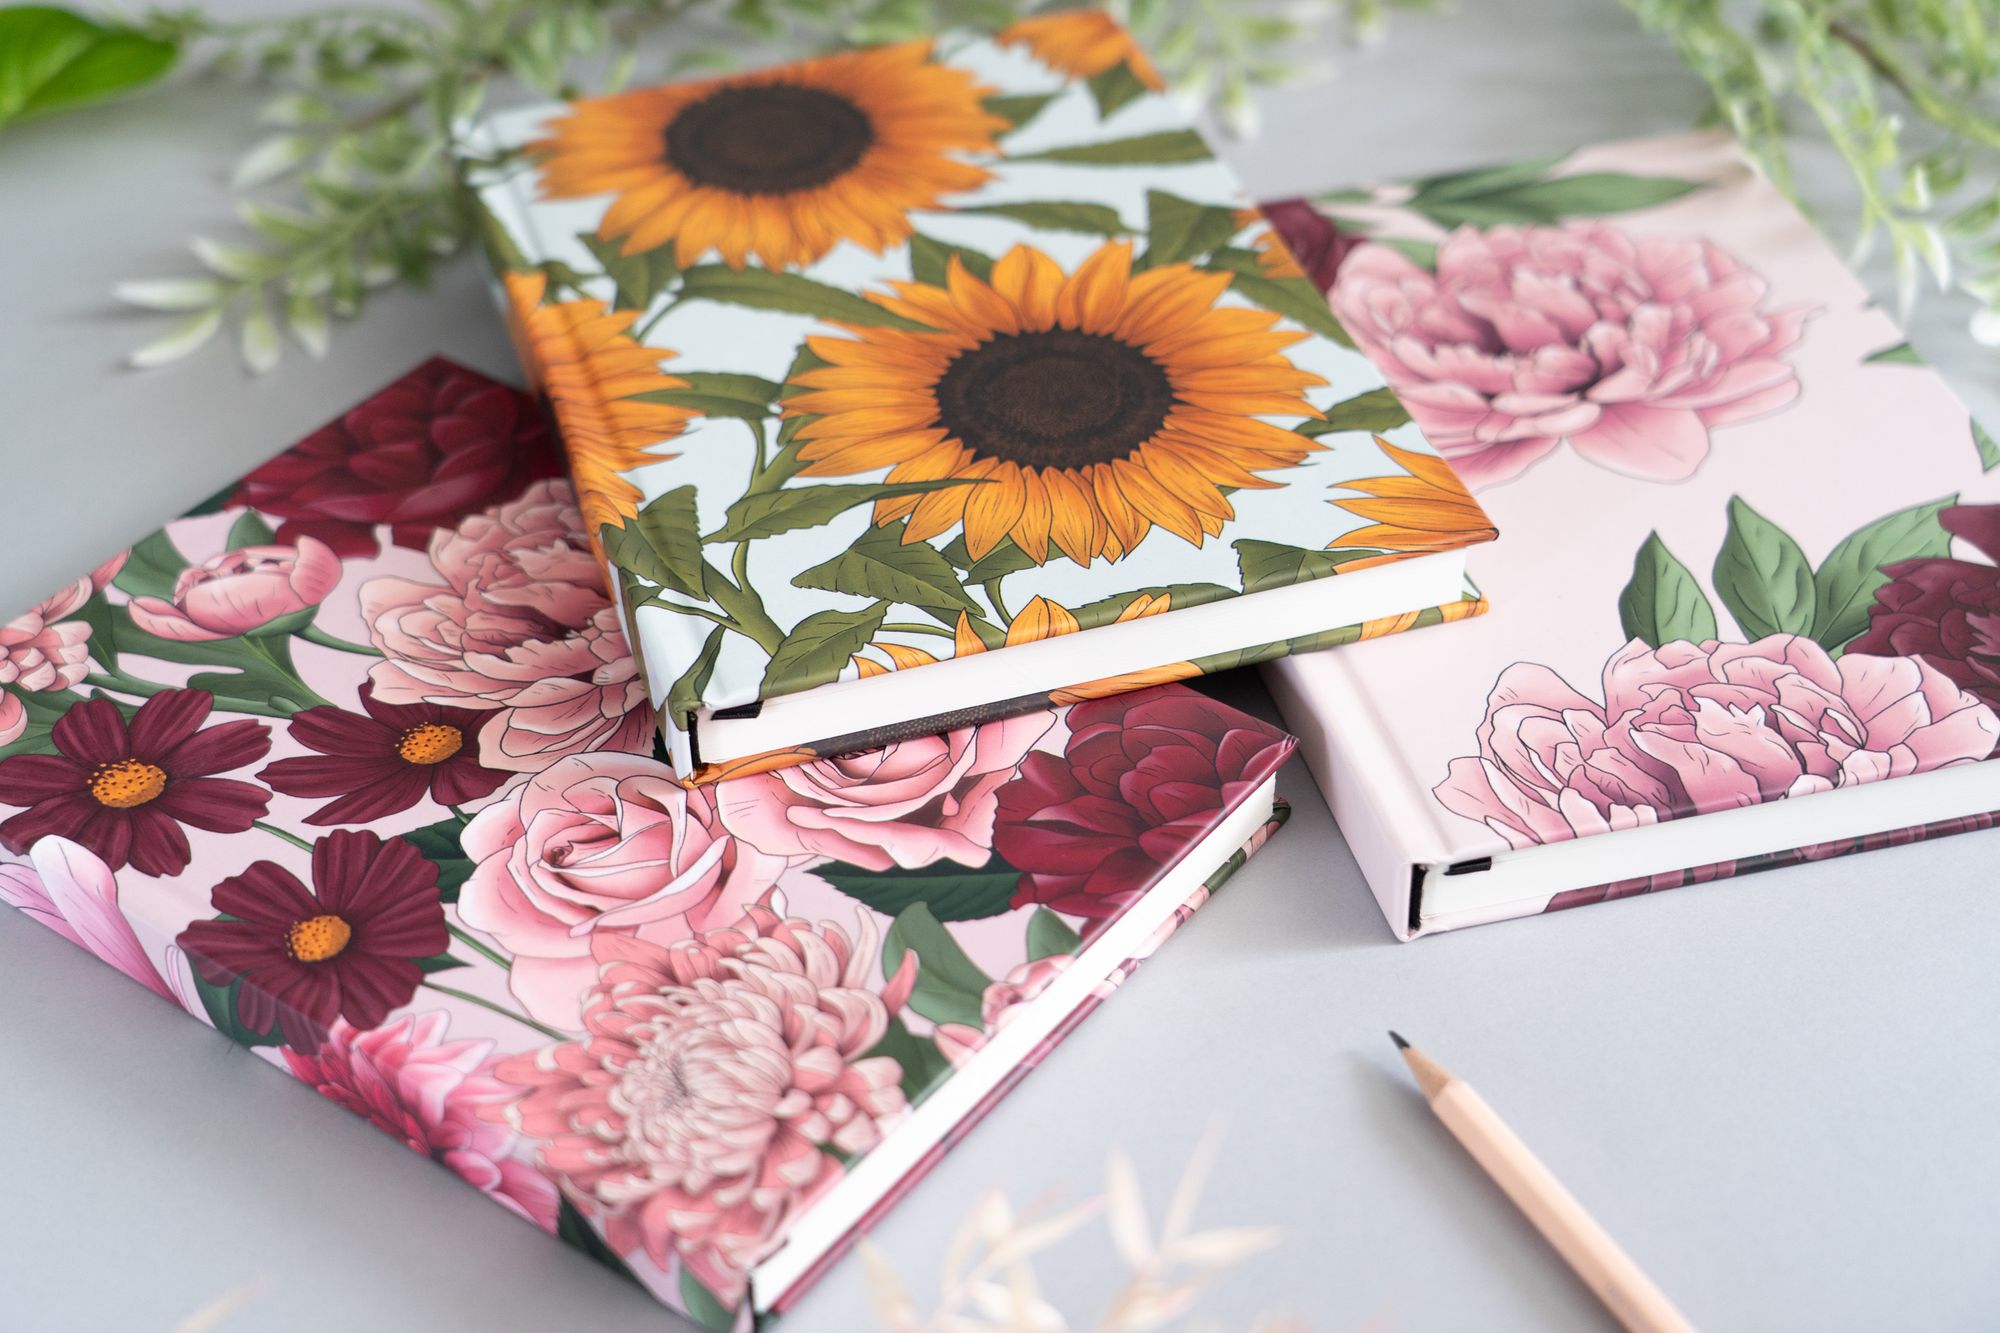 Gift ideas for that friend obsessed with stationery